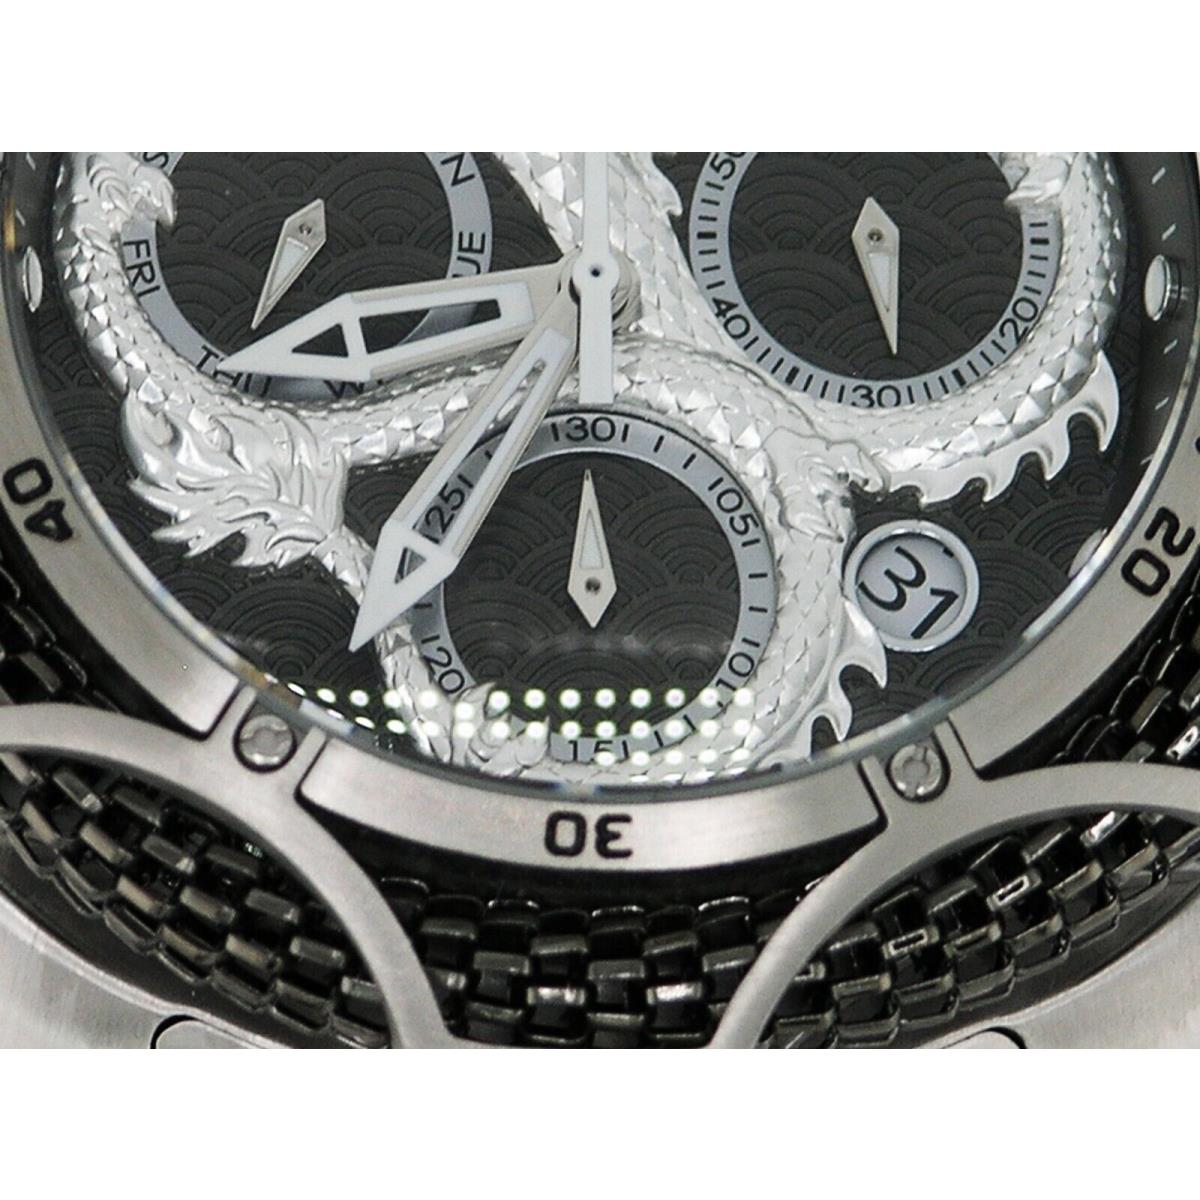 Invicta watch Reserve - Dial: Black, Band: Silver, Bezel: Silver